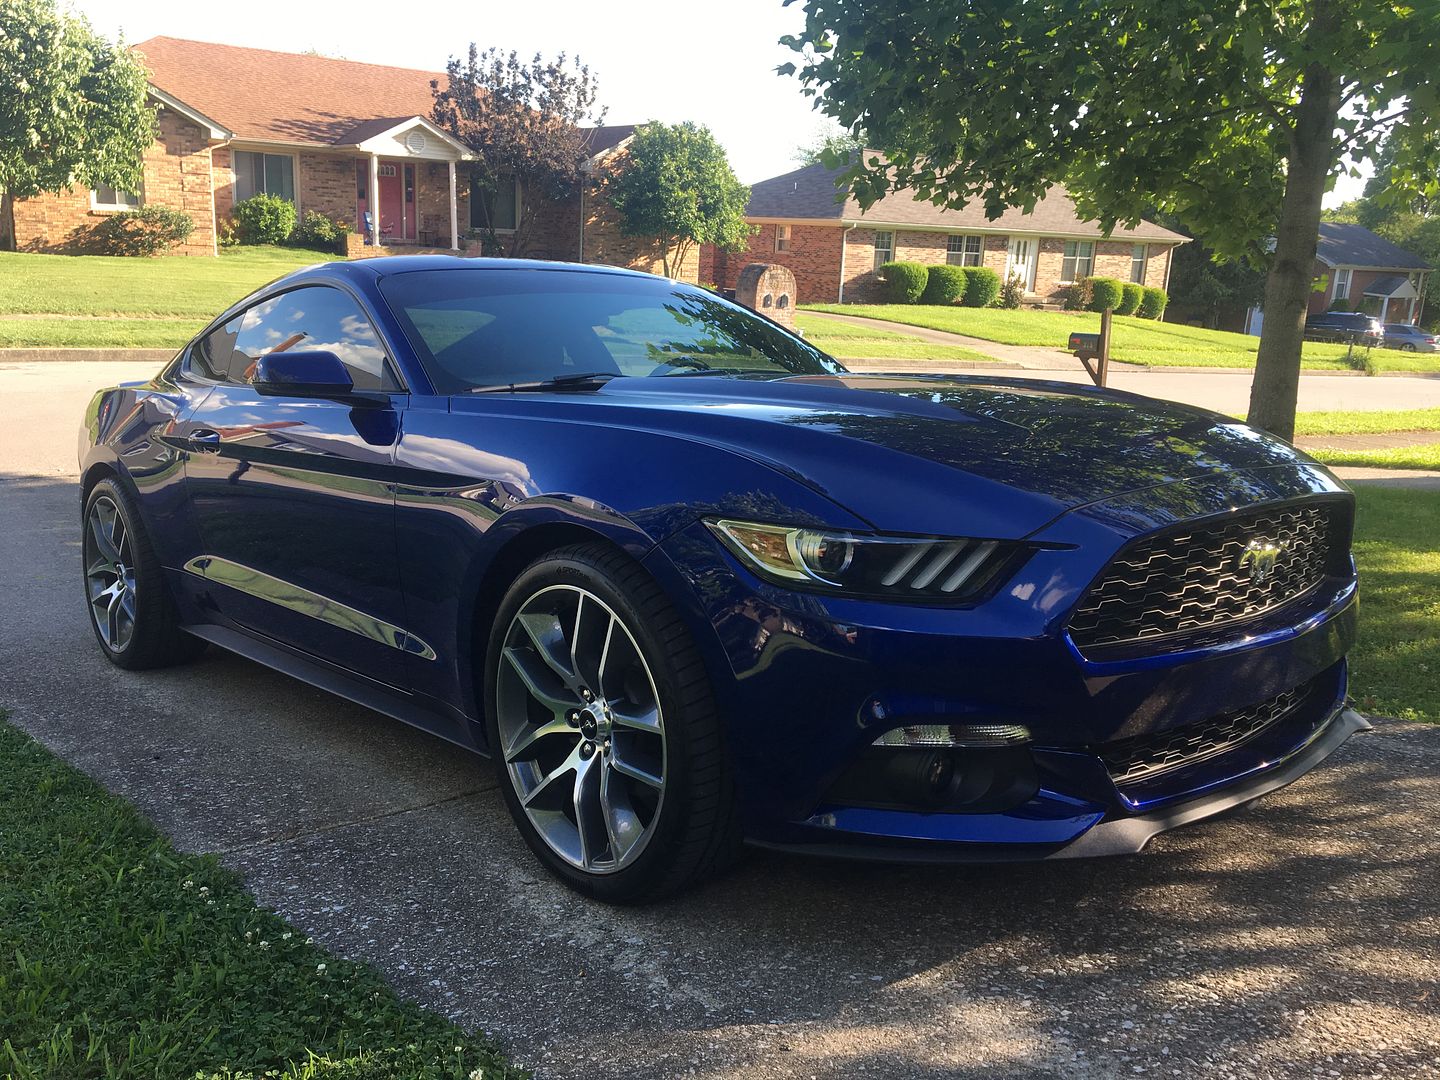 2016 Mustang: Ecoboost or V6? Why? - Page 3 - AR15.COM